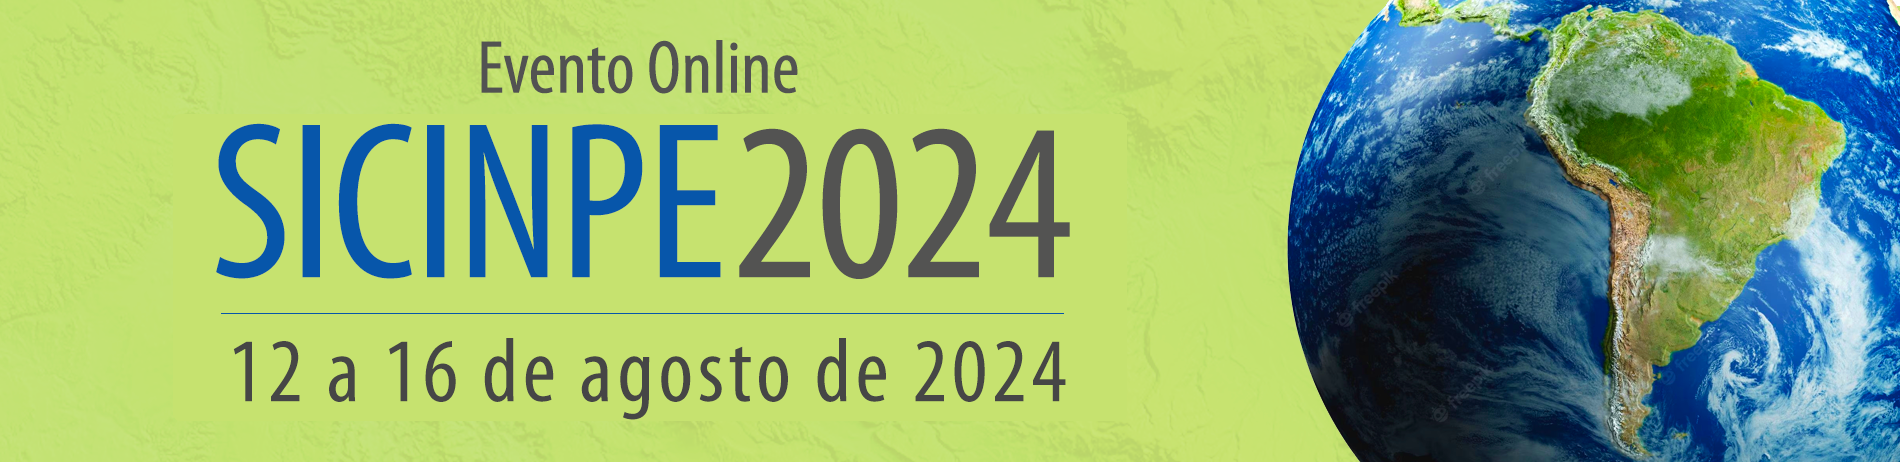 Sicinpe2024-Banner01.png